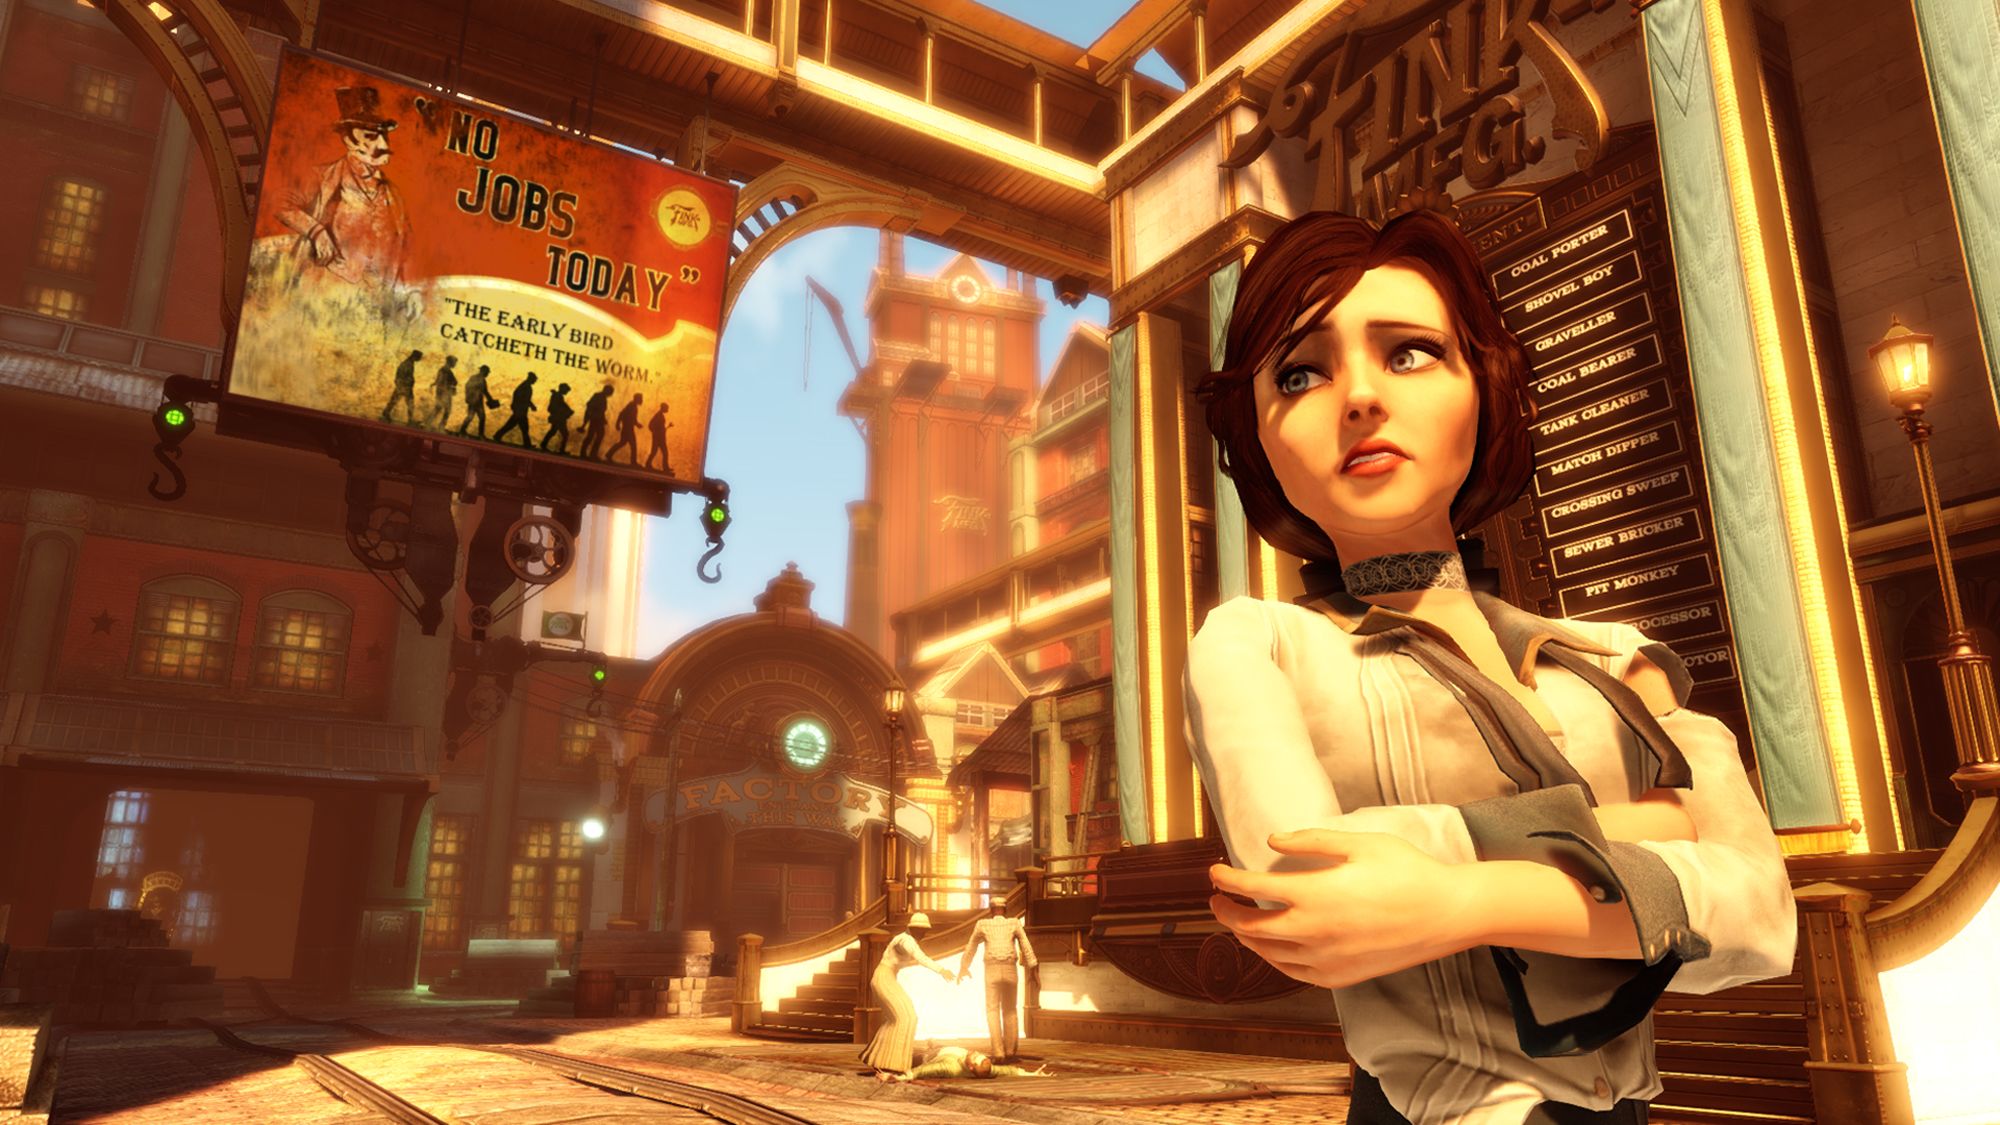 Bioshock Porn - Emotions are real, universe endless in 'BioShock Infinite' | CNN Business